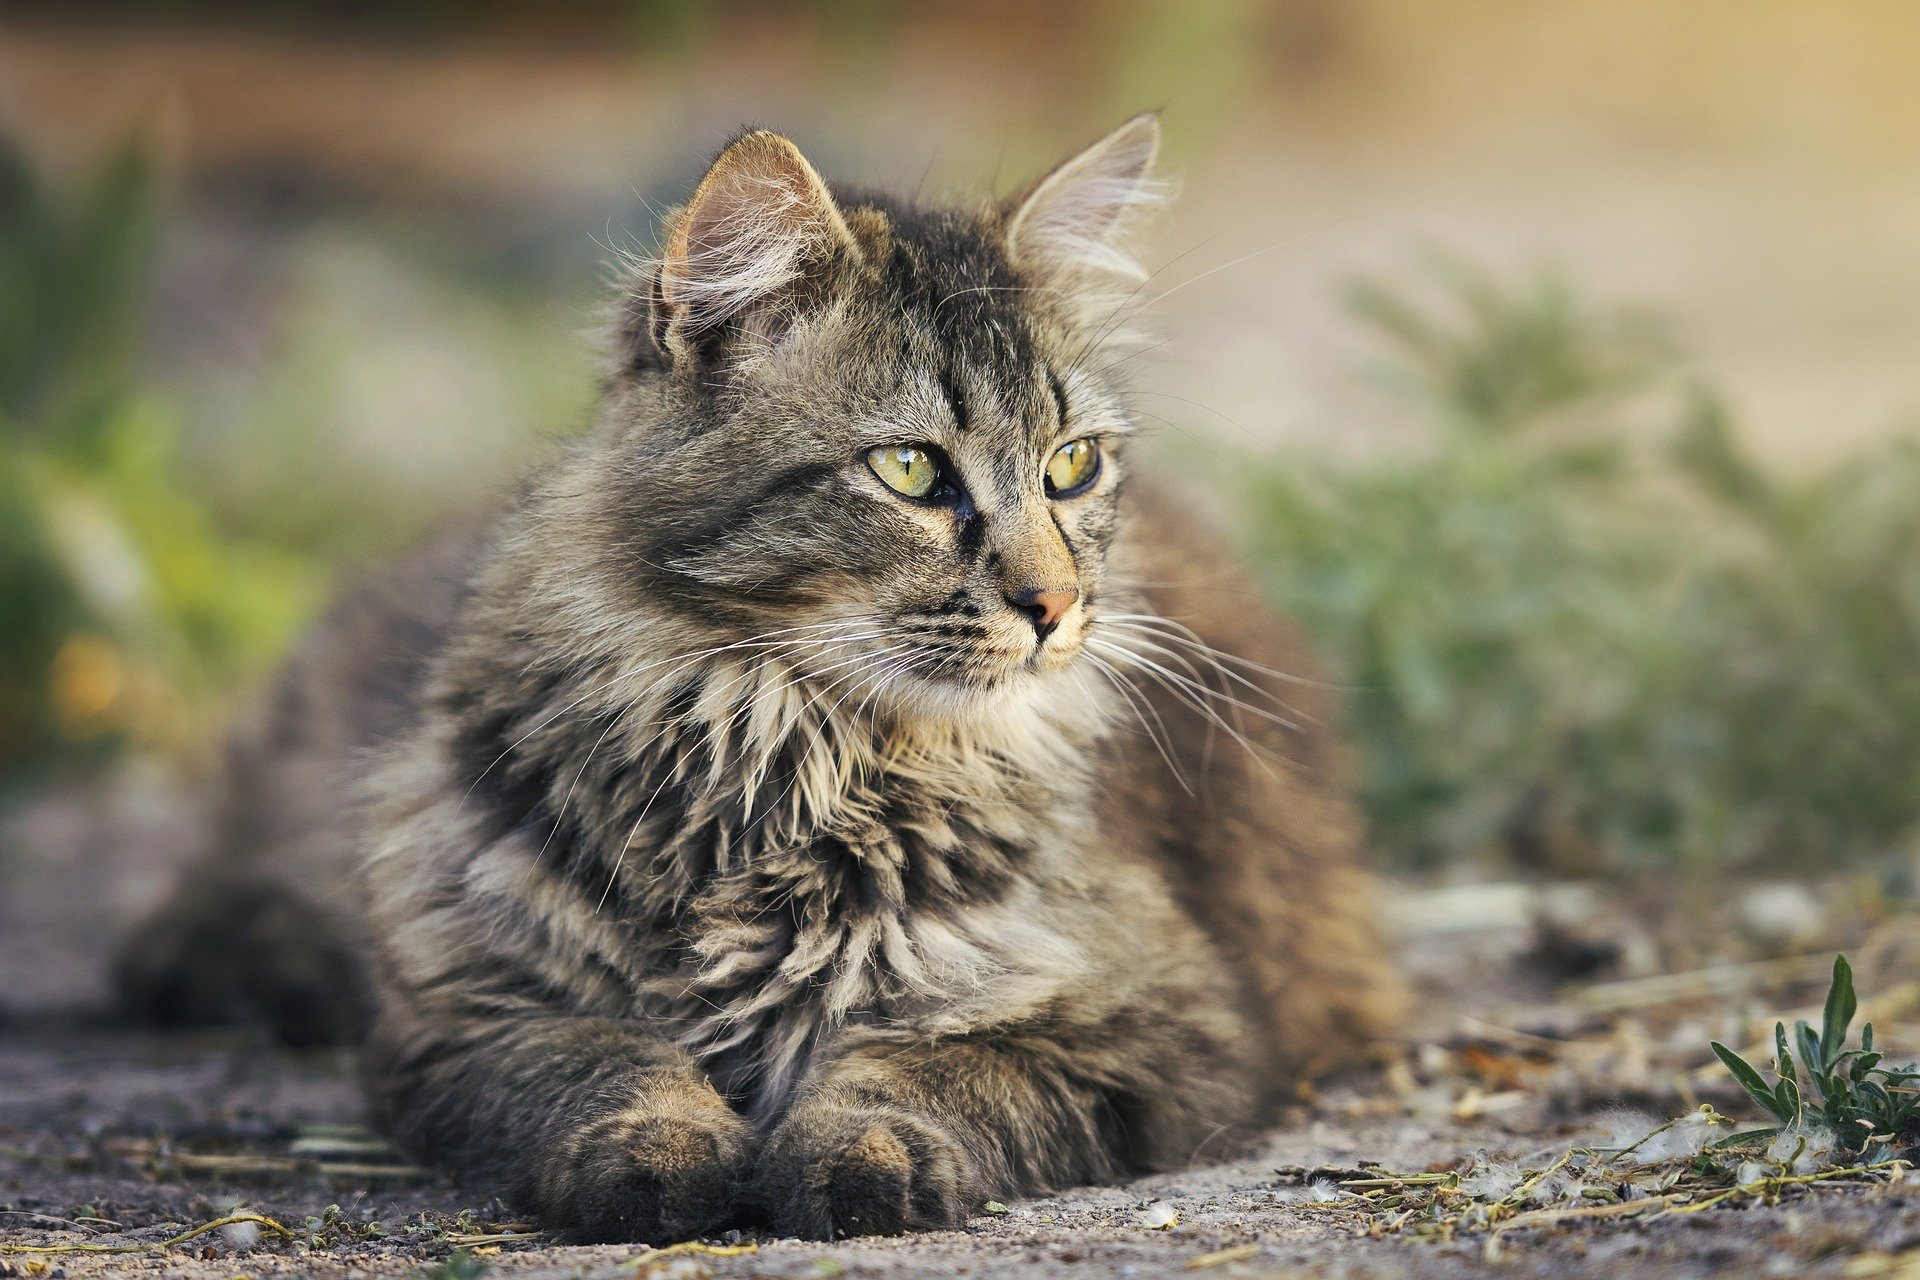 Research Review: Comparing “senior” and “adult” cat diets